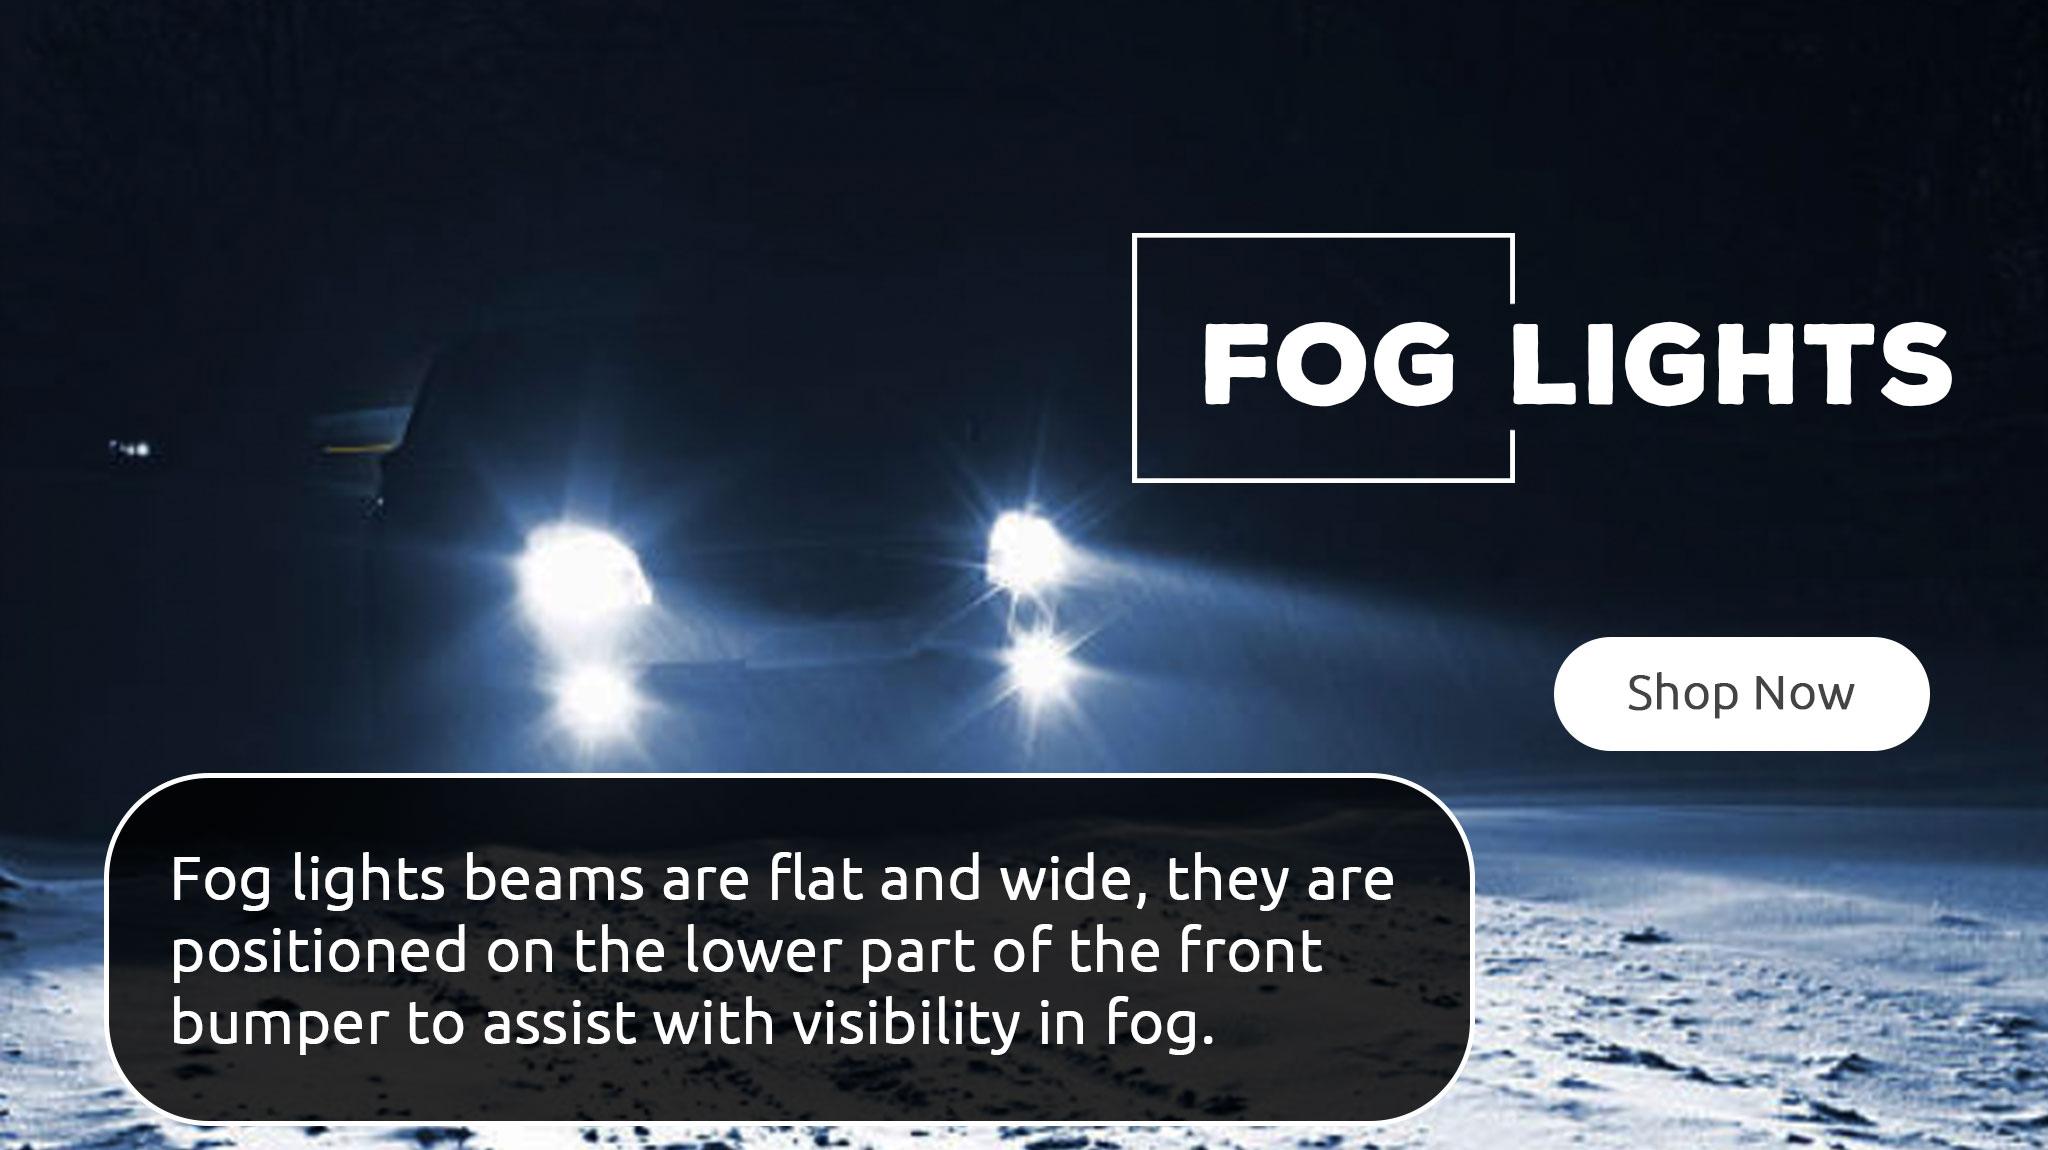 Fog lights beams are flat and wide, they are positioned on the lower part of the front bumper to assist with visibility in fog.